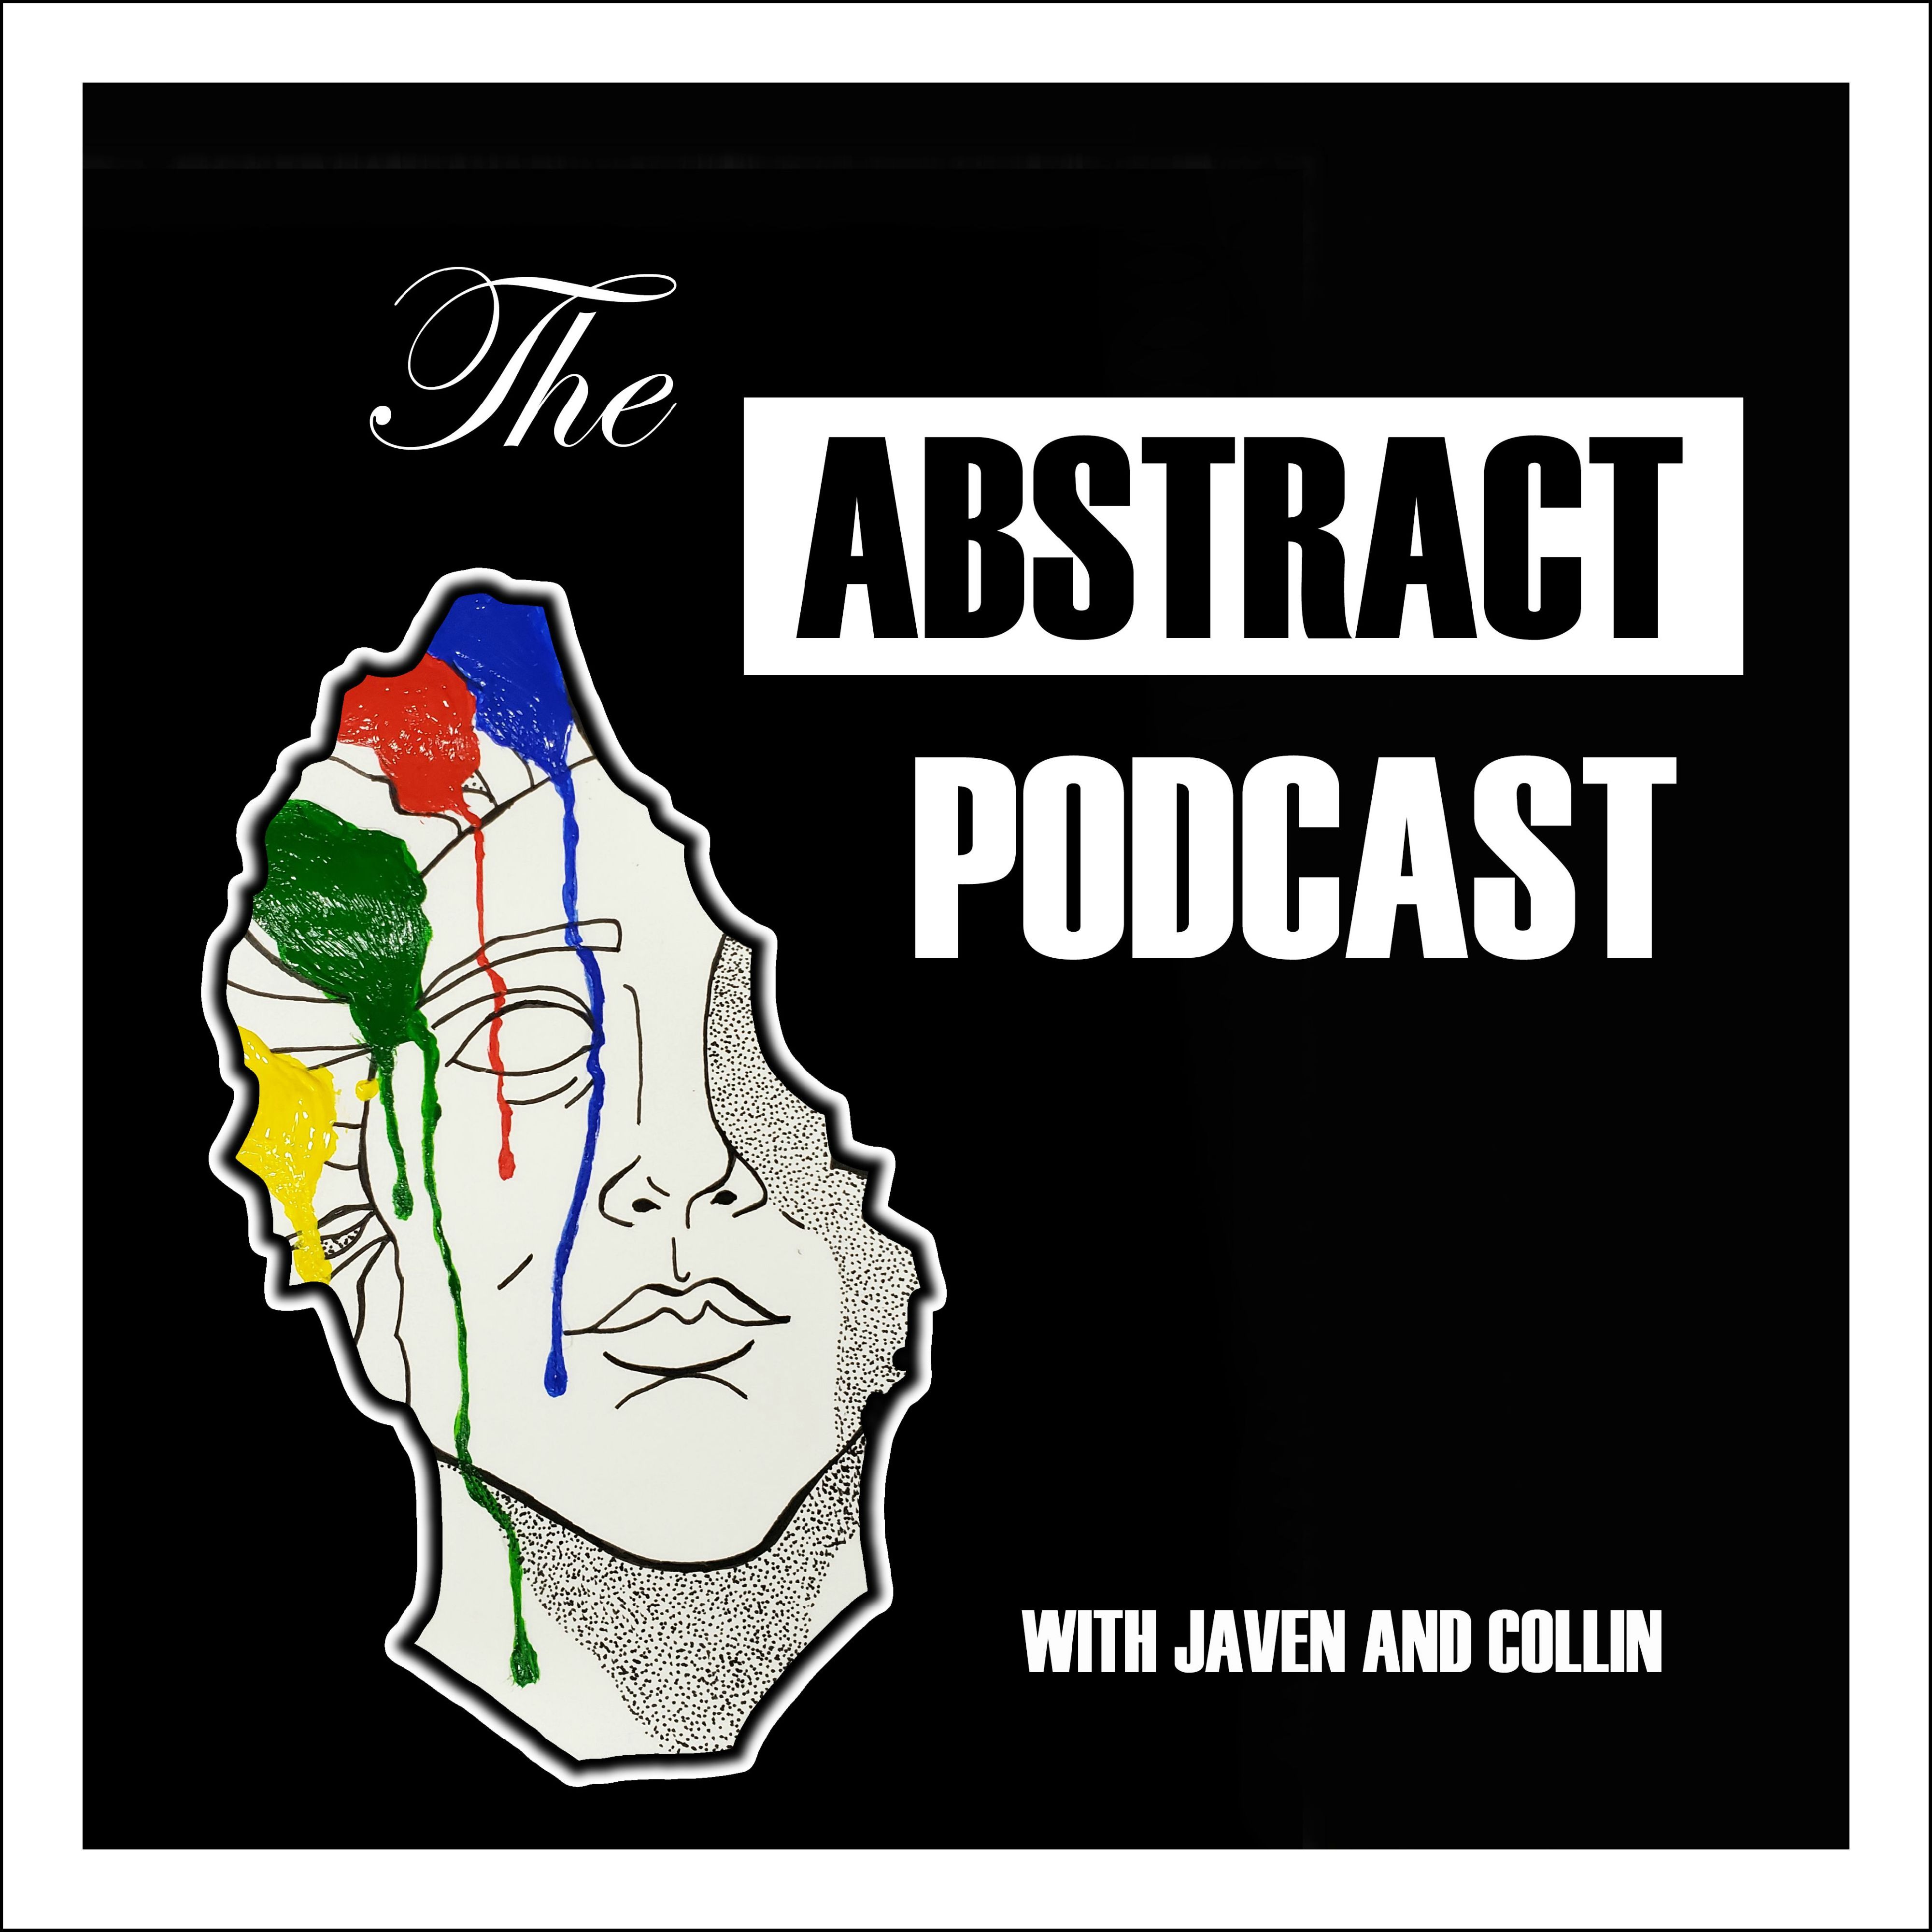 The Abstract Podcast